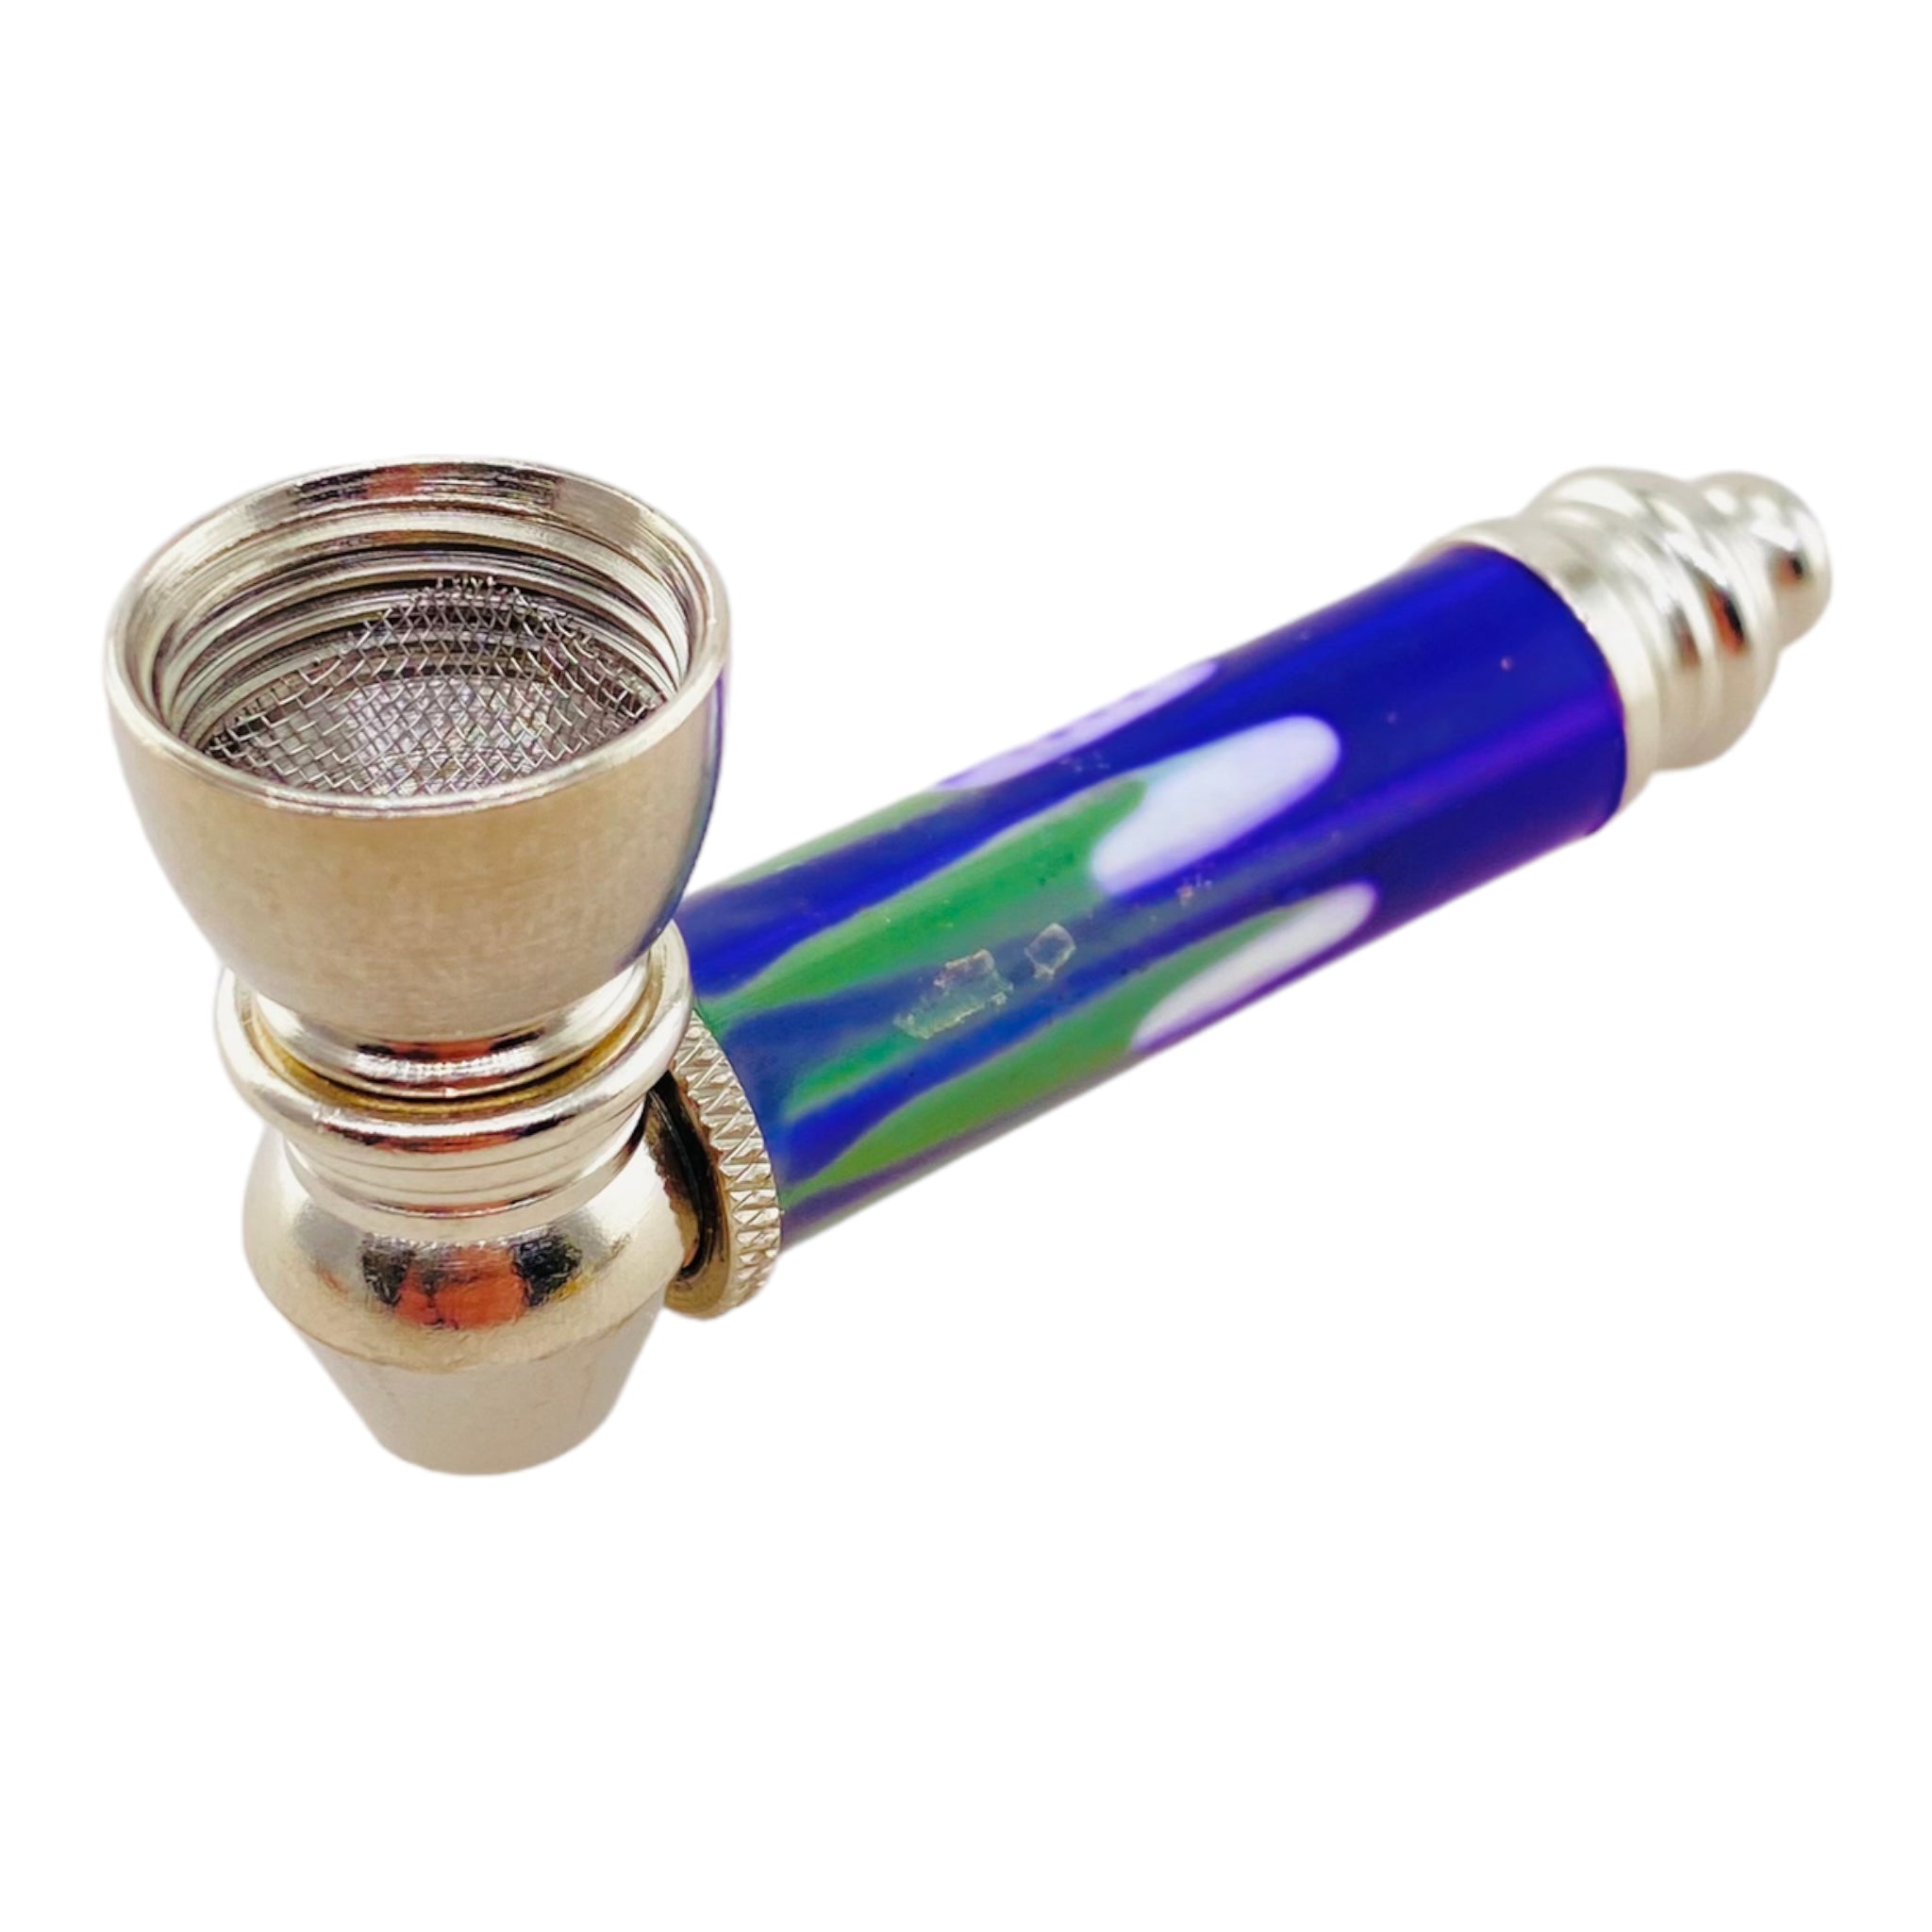 Metal Hand Pipes - Silver Chrome Hand Pipe With Decorative Green And Blue Plastic Stem